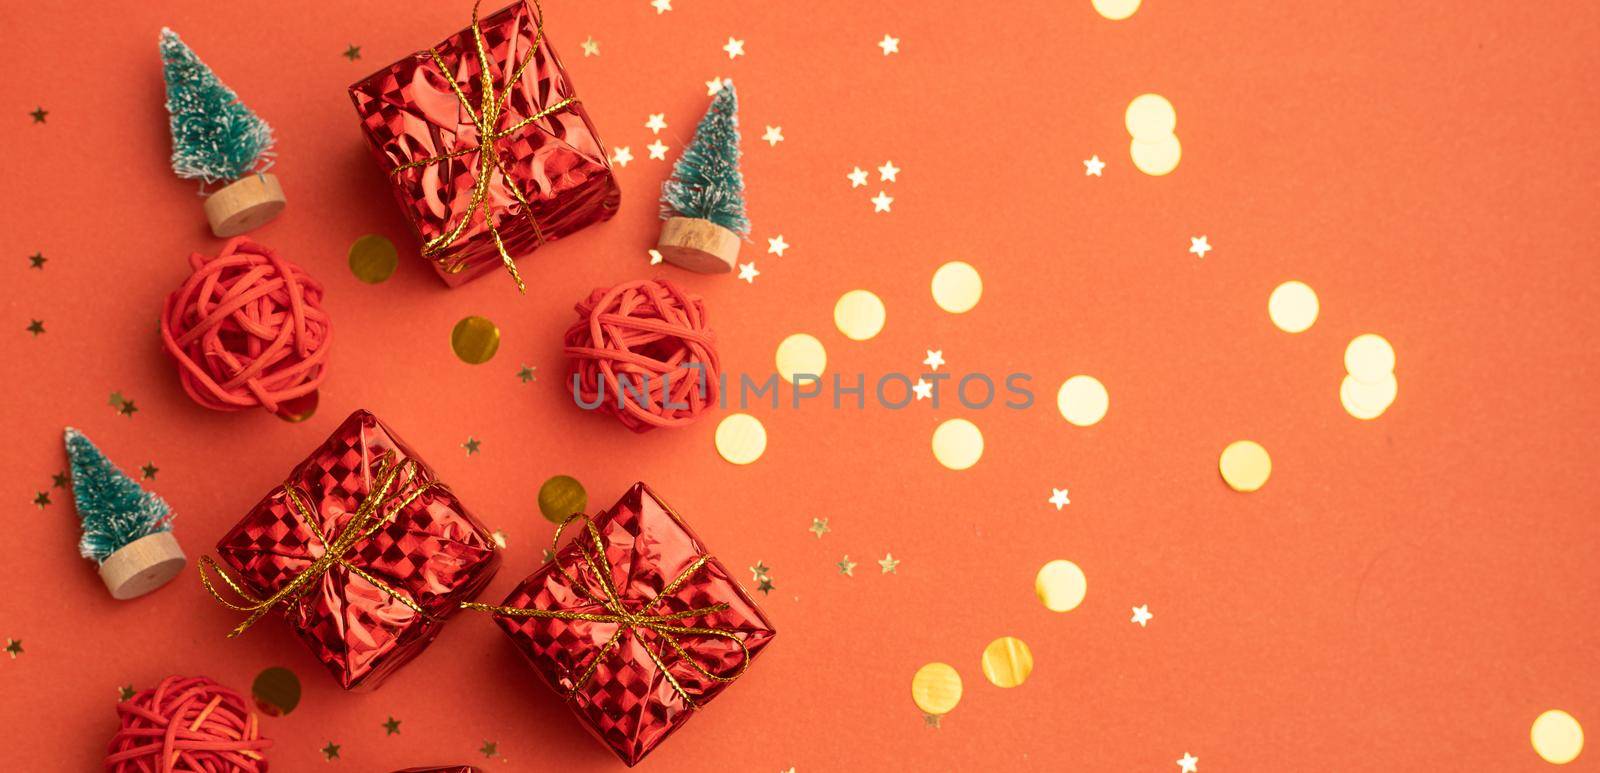 Red Christmas gifts and Christmas trees on a red background. An article about the New year and Christmas. The choice of gifts. A red gift . New Year's background